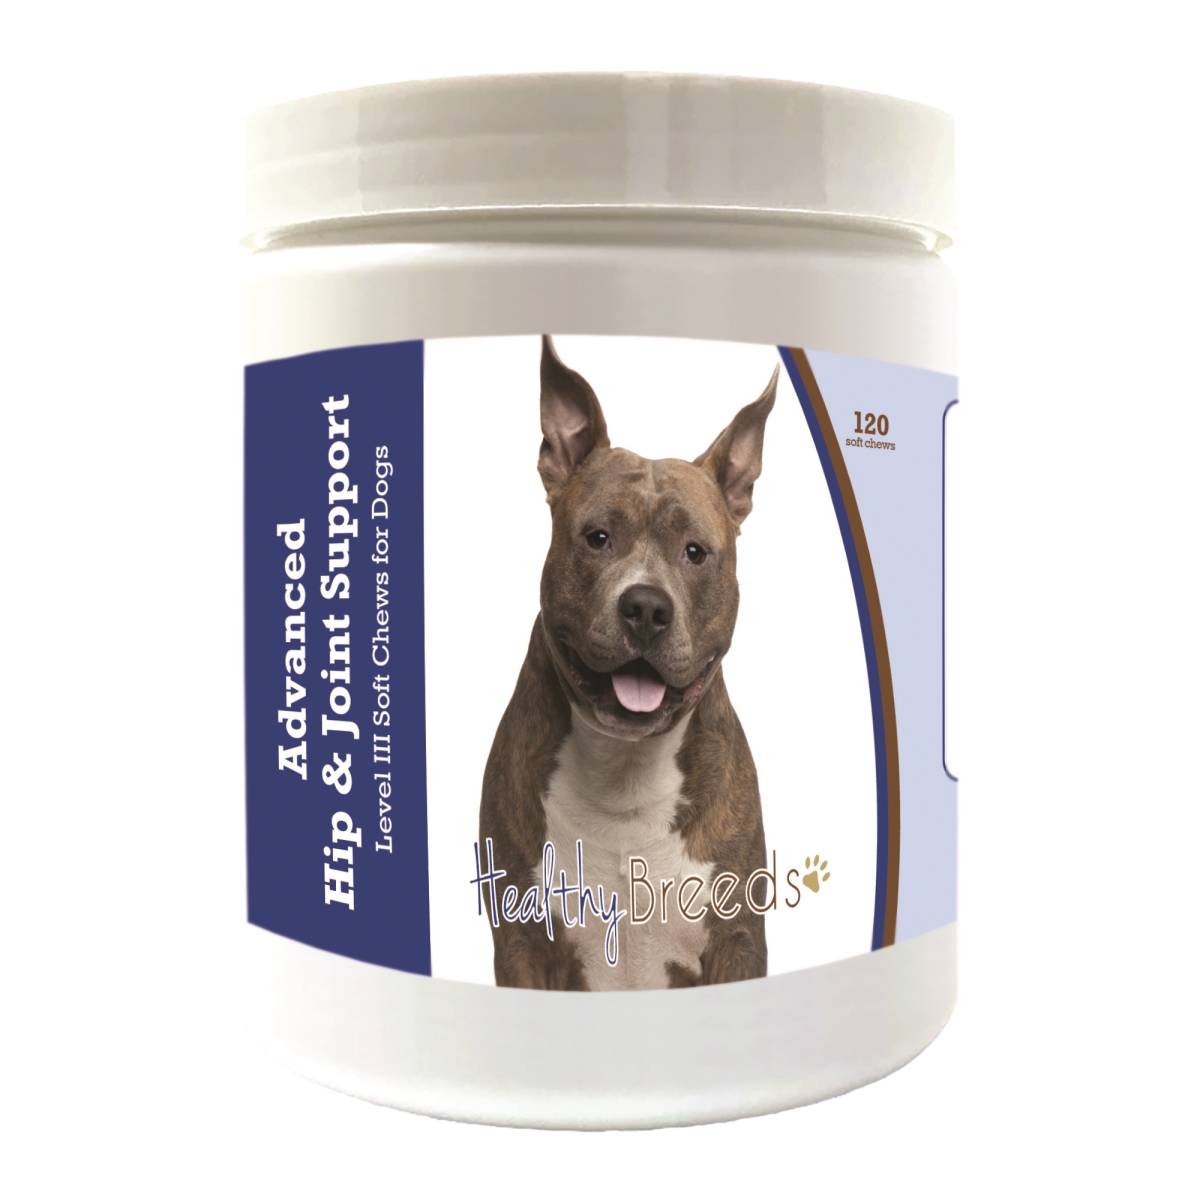 Picture of Healthy Breeds 192959897456 American Staffordshire Terrier Advanced Hip & Joint Support Level III Soft Chews for Dogs